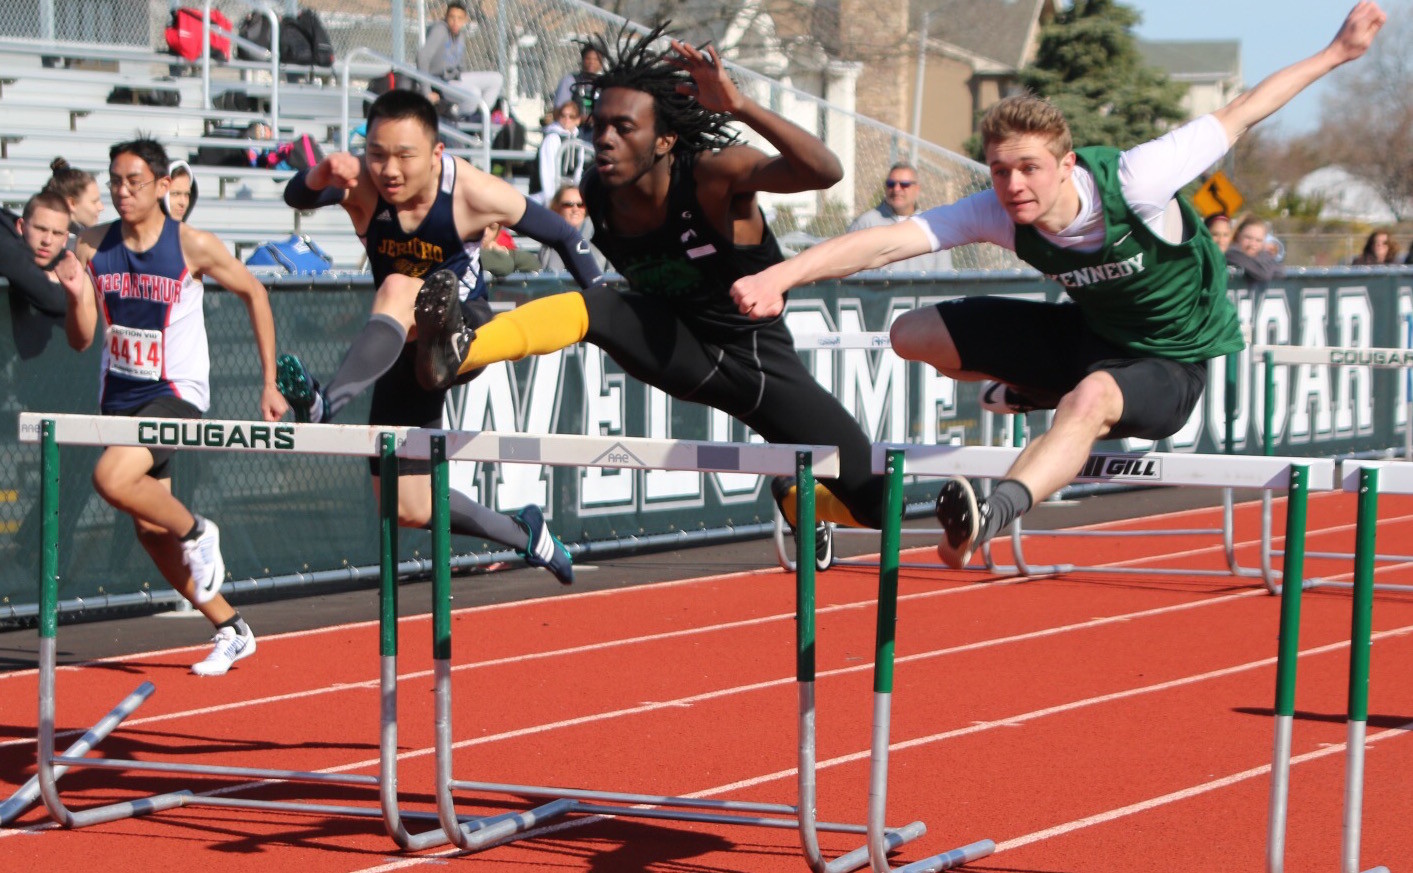 Ryan Cummings, right, a Kennedy High School junior, competed in the hurdles at the annual Cougar Invite last Saturday. The photographer, William Sasson, is a Kennedy junior and member of the track team.